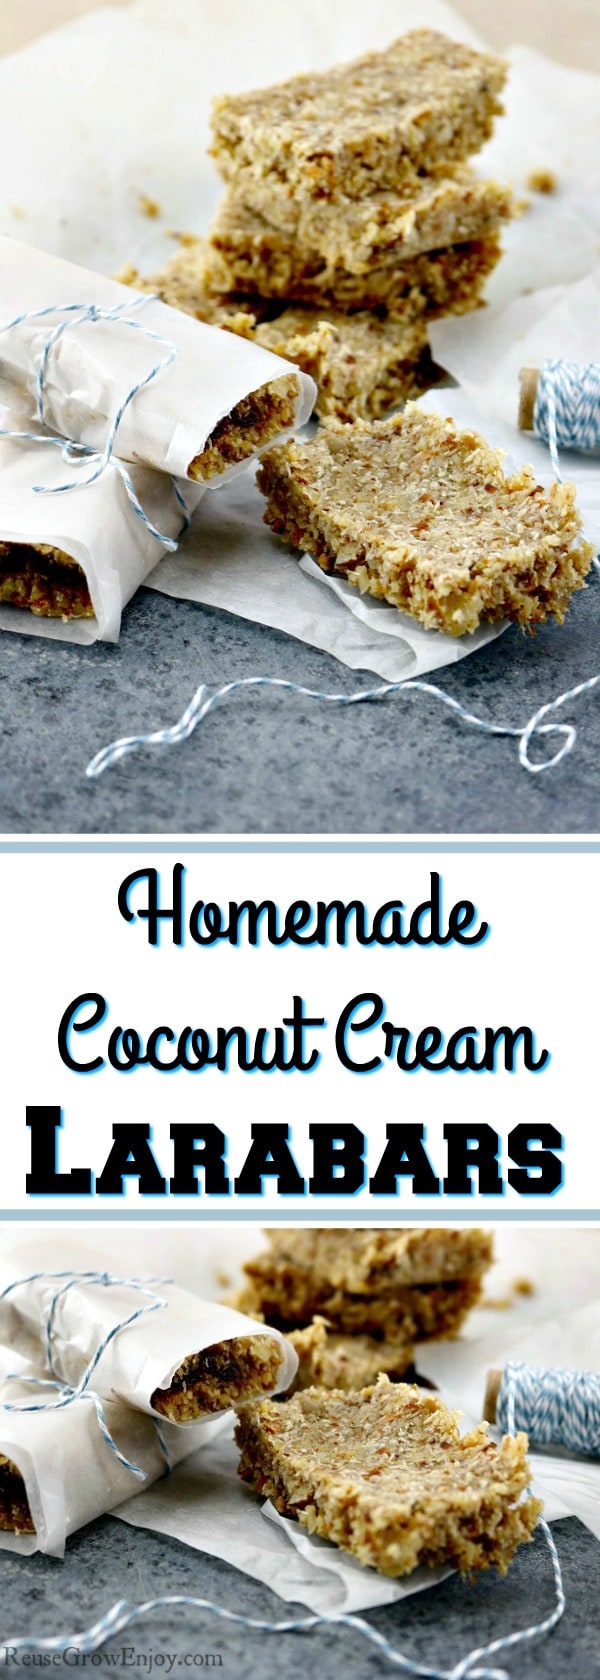 Do you enjoy LaraBars? I know I sure do! You can make them yourself much cheaper! Check out this Homemade Coconut Cream Mock Larabars Recipe! It is Paleo & Gluten Free.